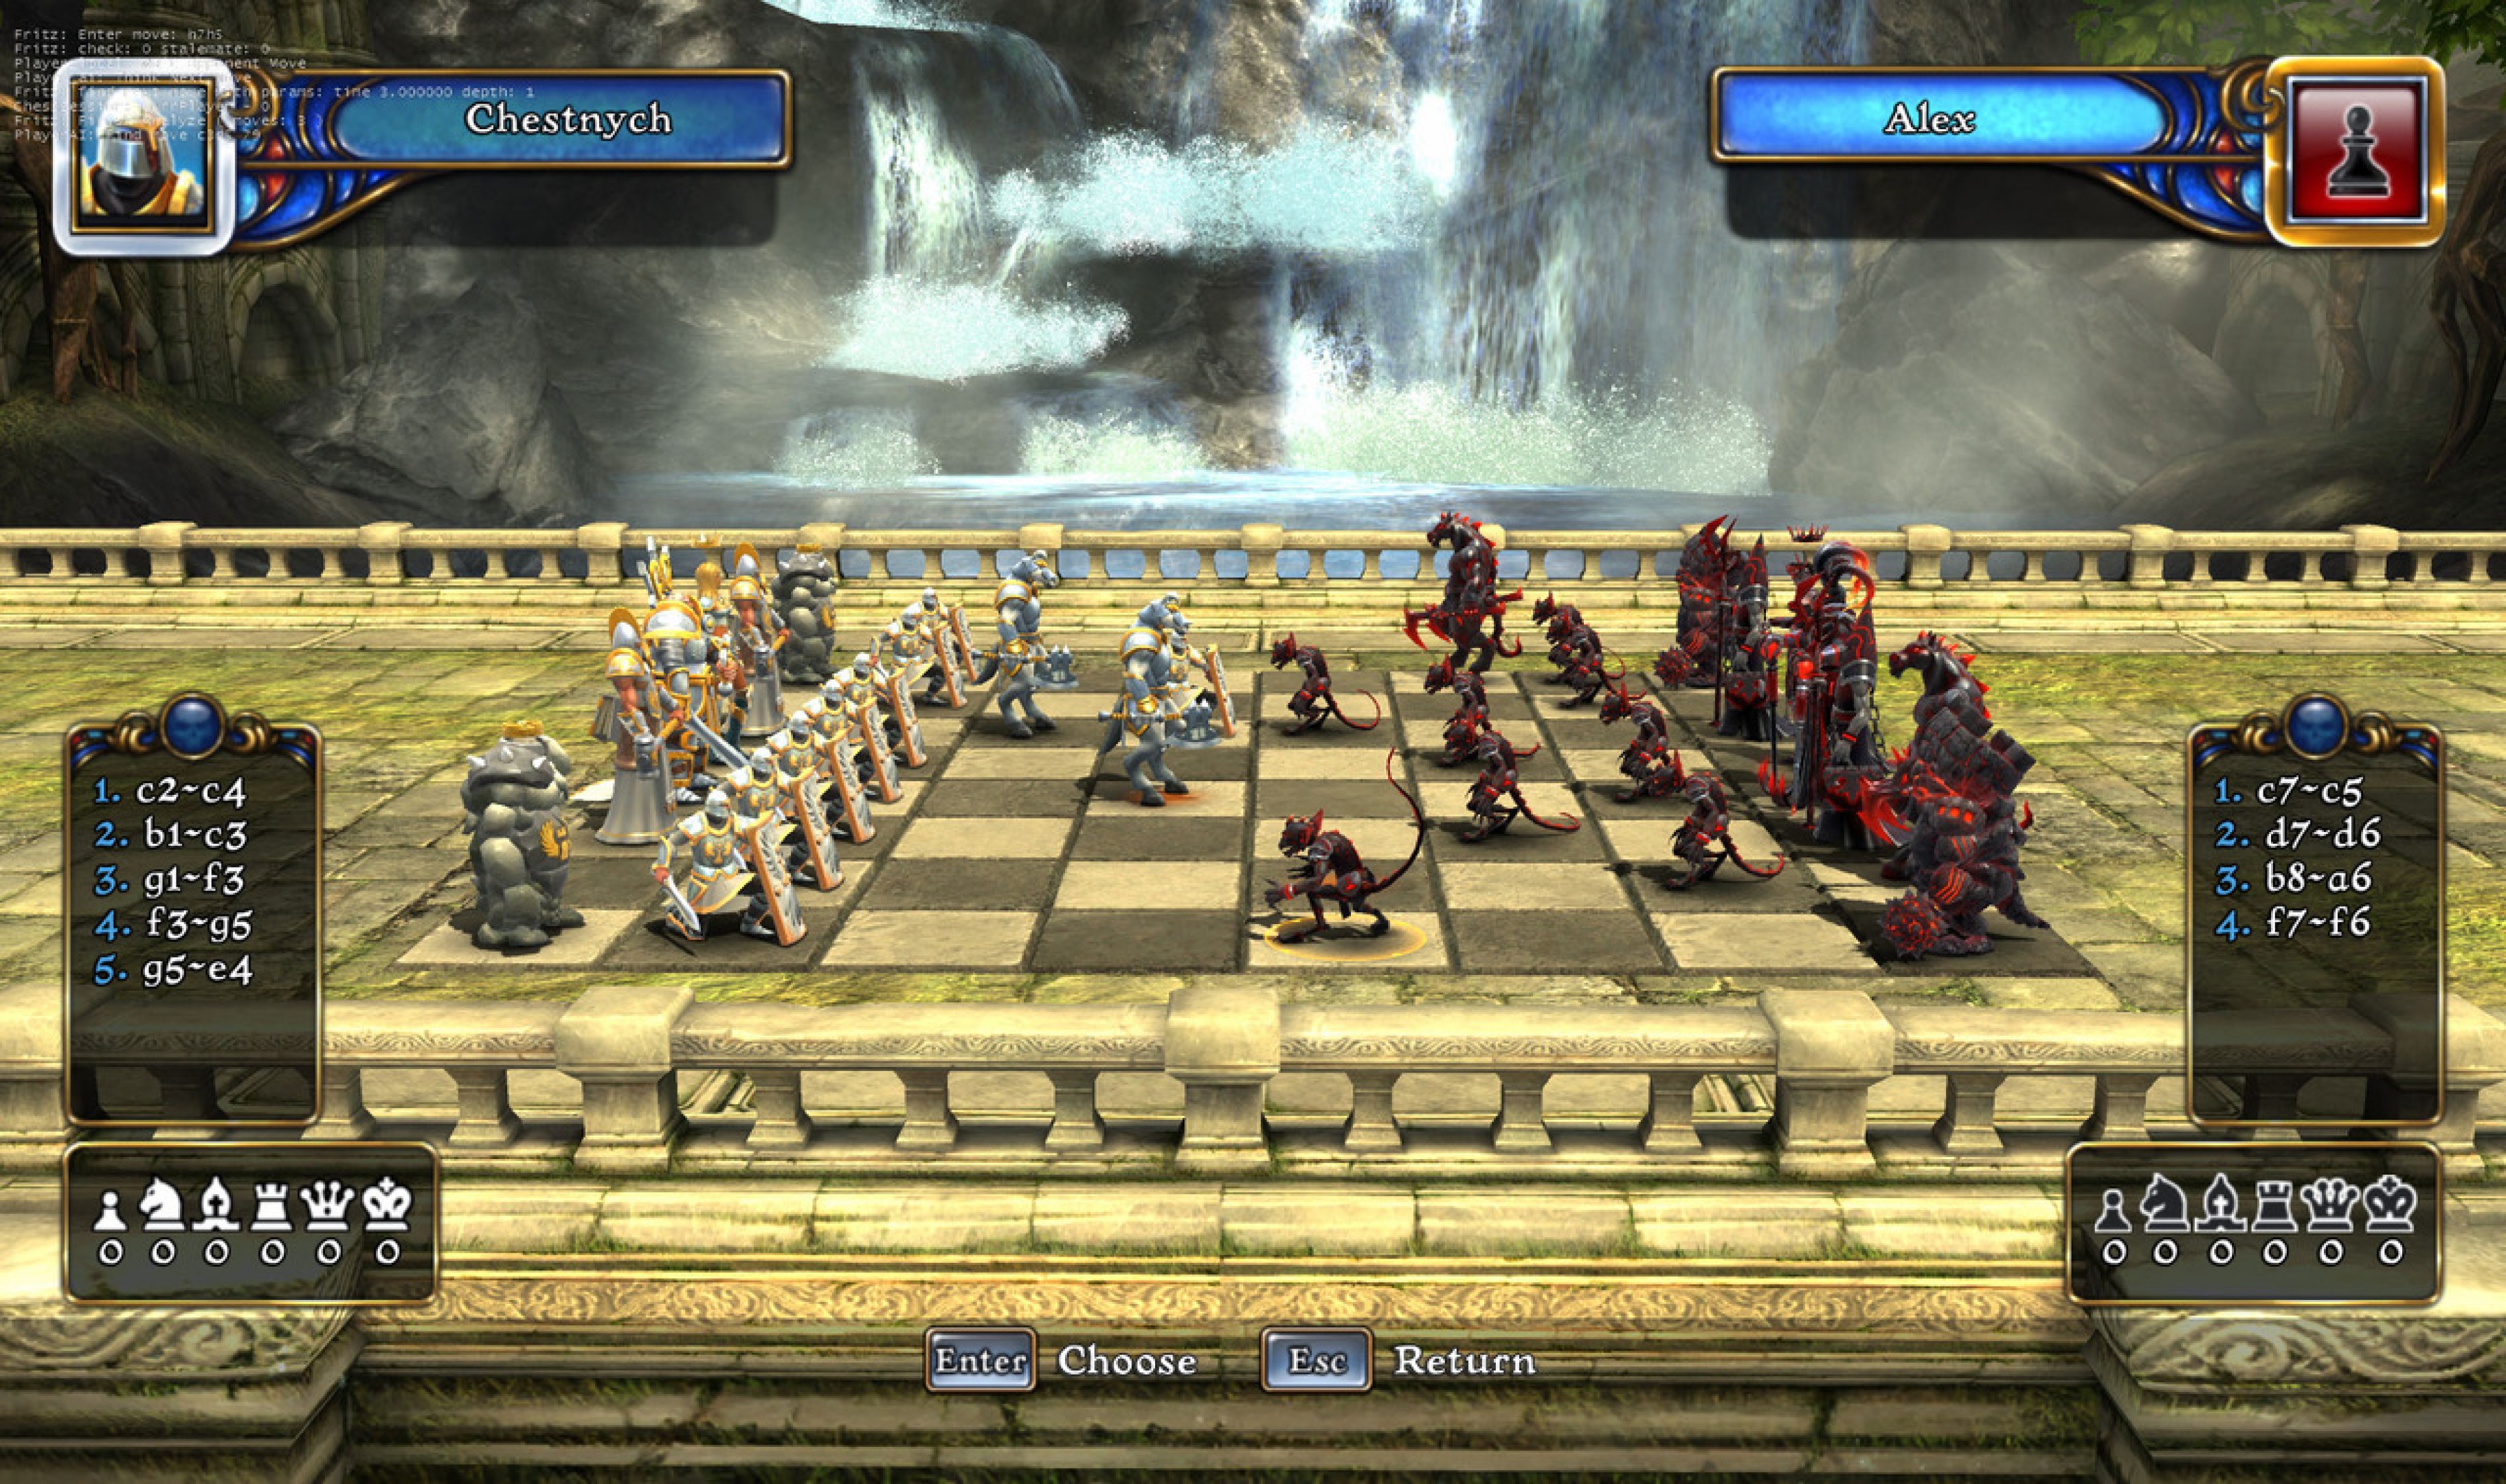 download the new version for apple Toon Clash CHESS